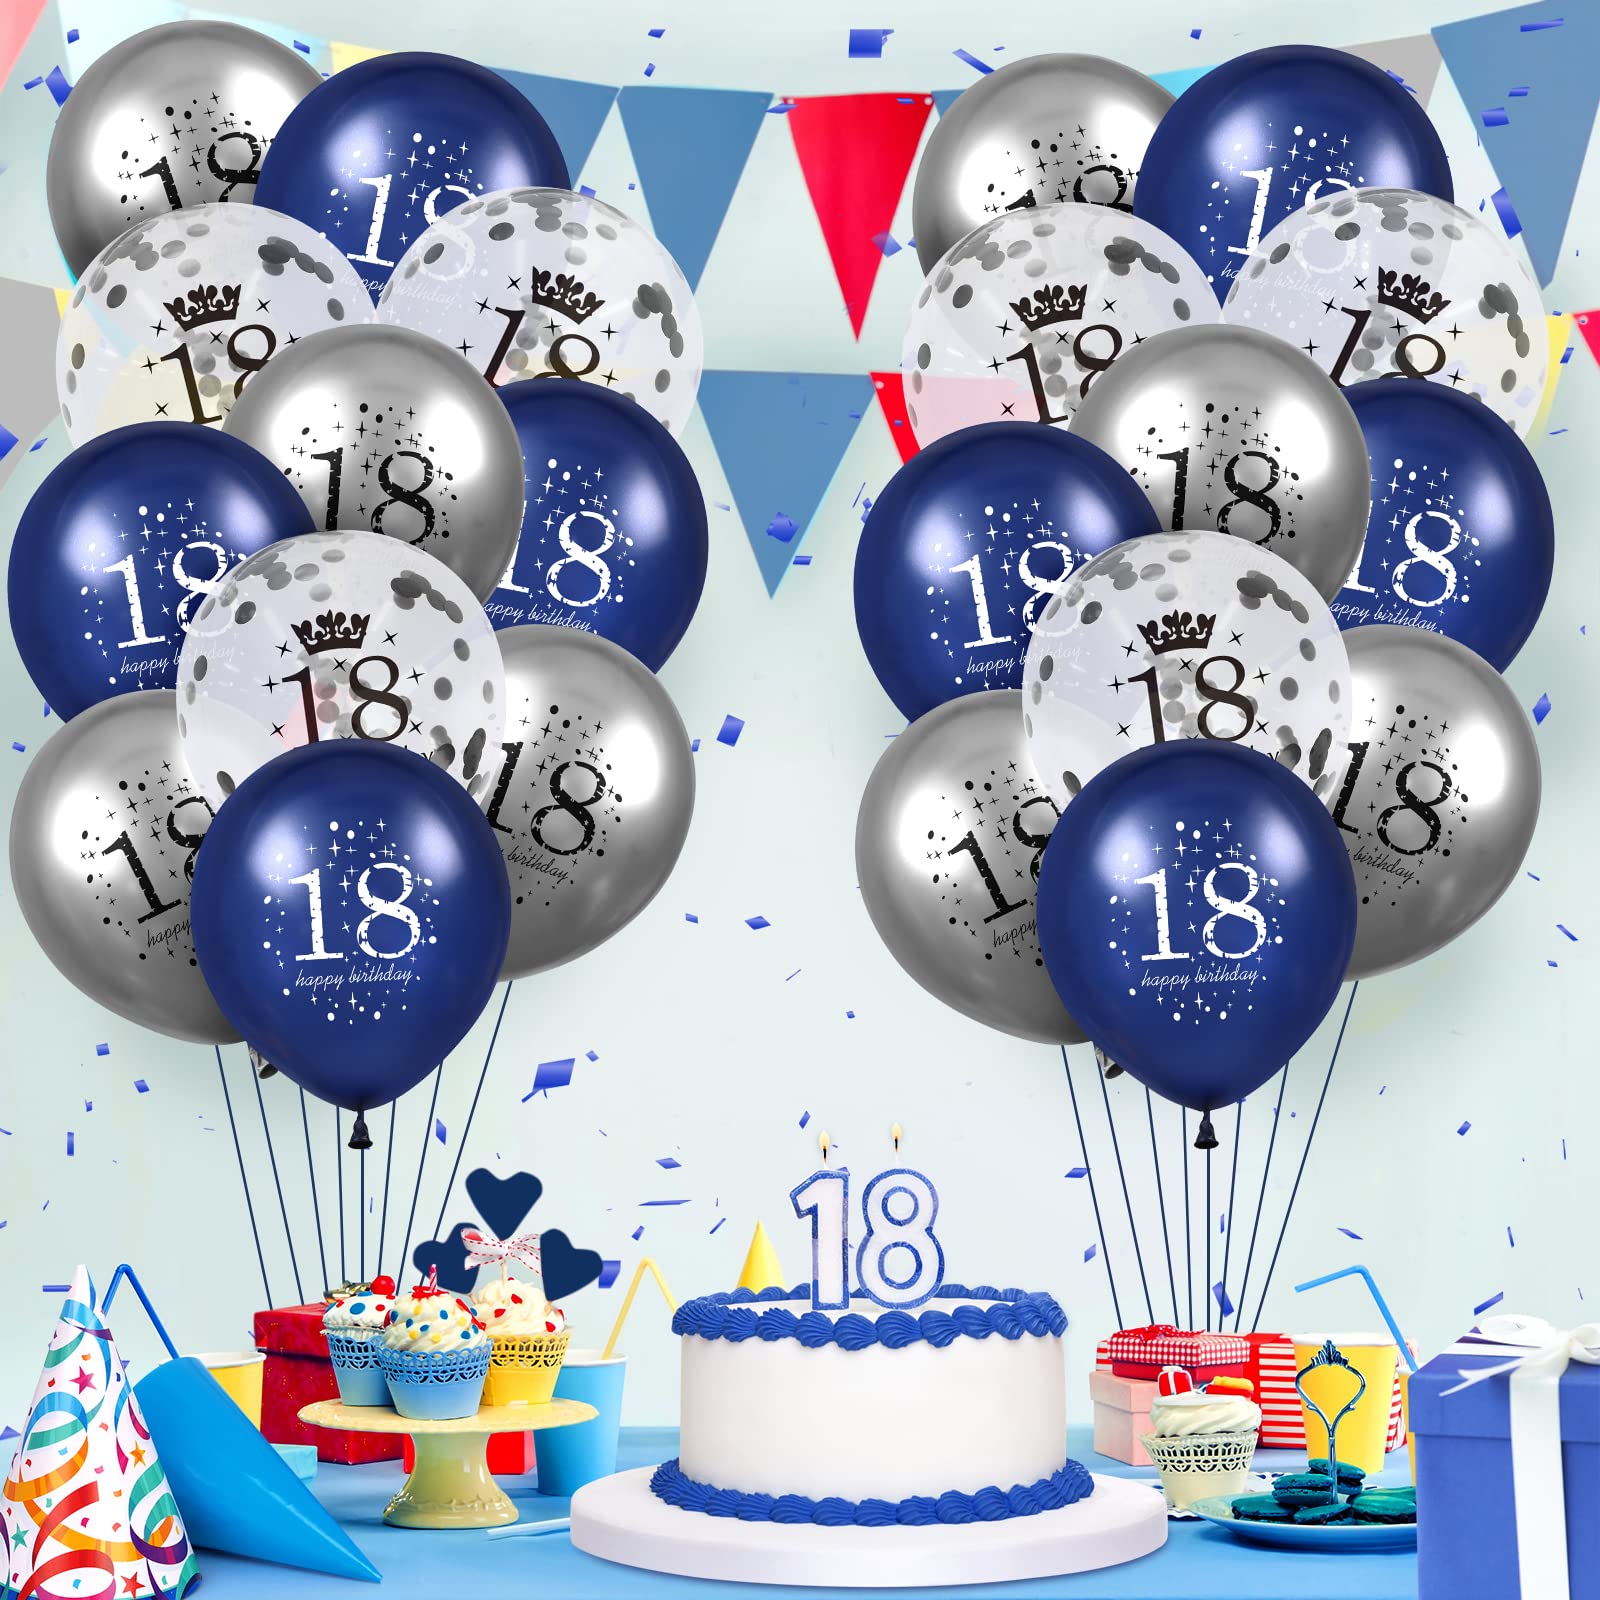 18th Birthday Balloons, 15 PCS Navy Blue Silver Latex 18th Birthday Balloons for Boys Girls 18th Anniversary Happy Birthday Party Decorations Navy Blue Balloons Decor Supplies,12 Inches